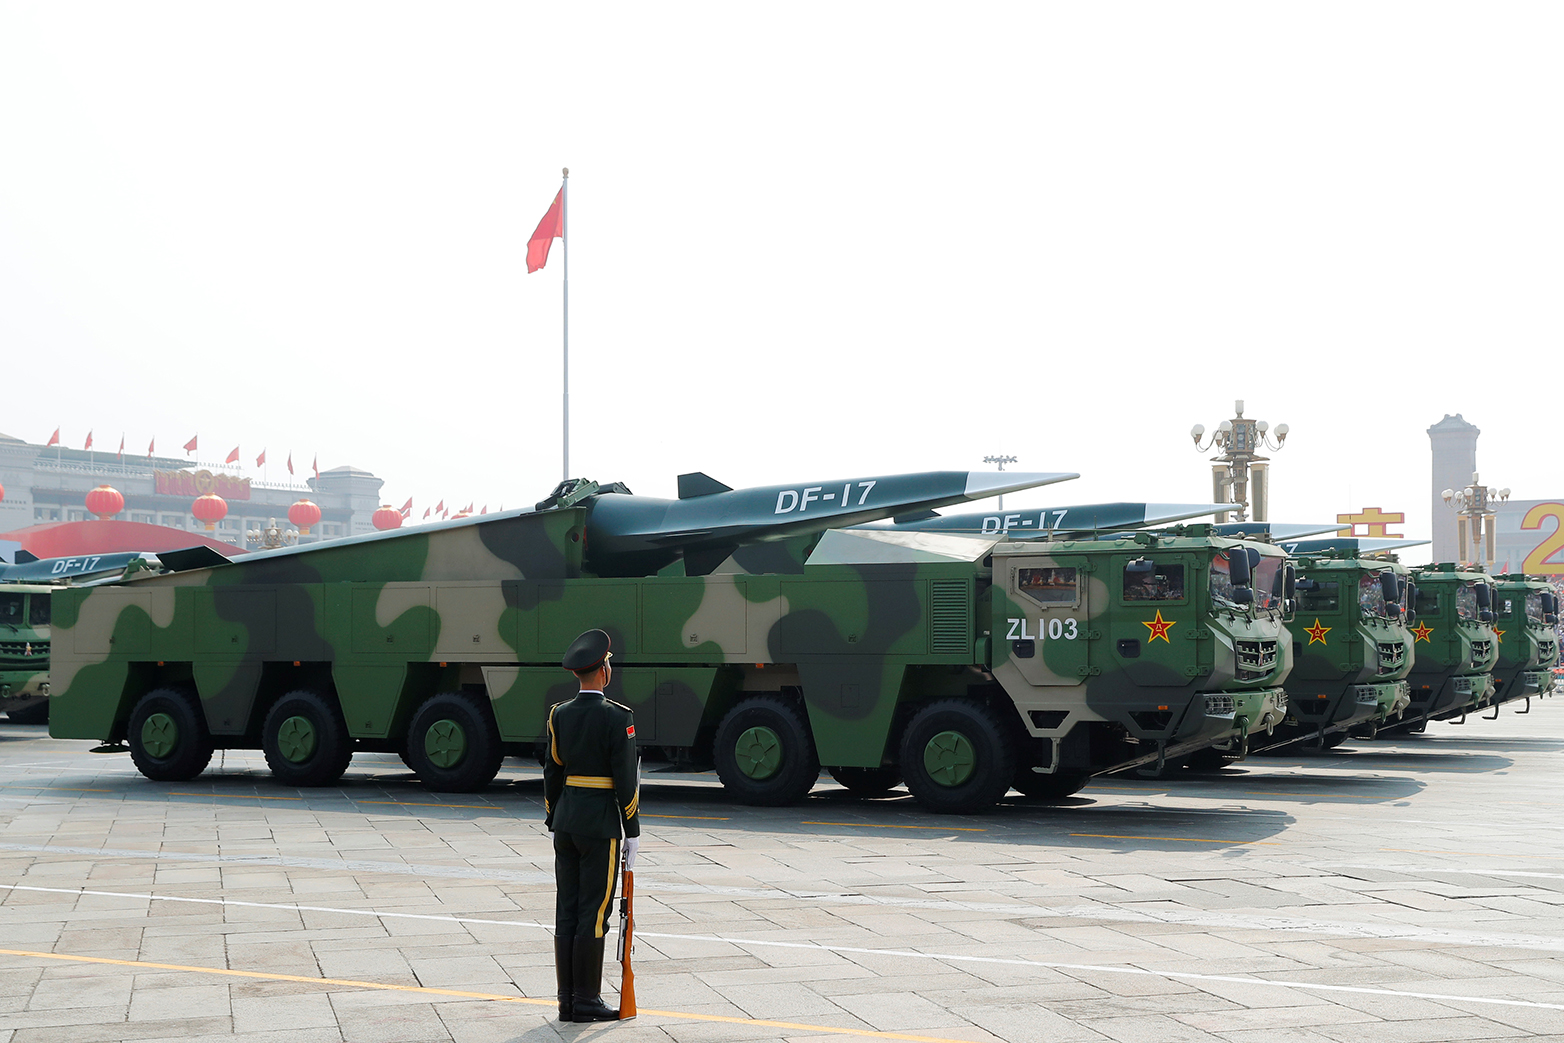 Military vehicles carrying hypersonic missiles